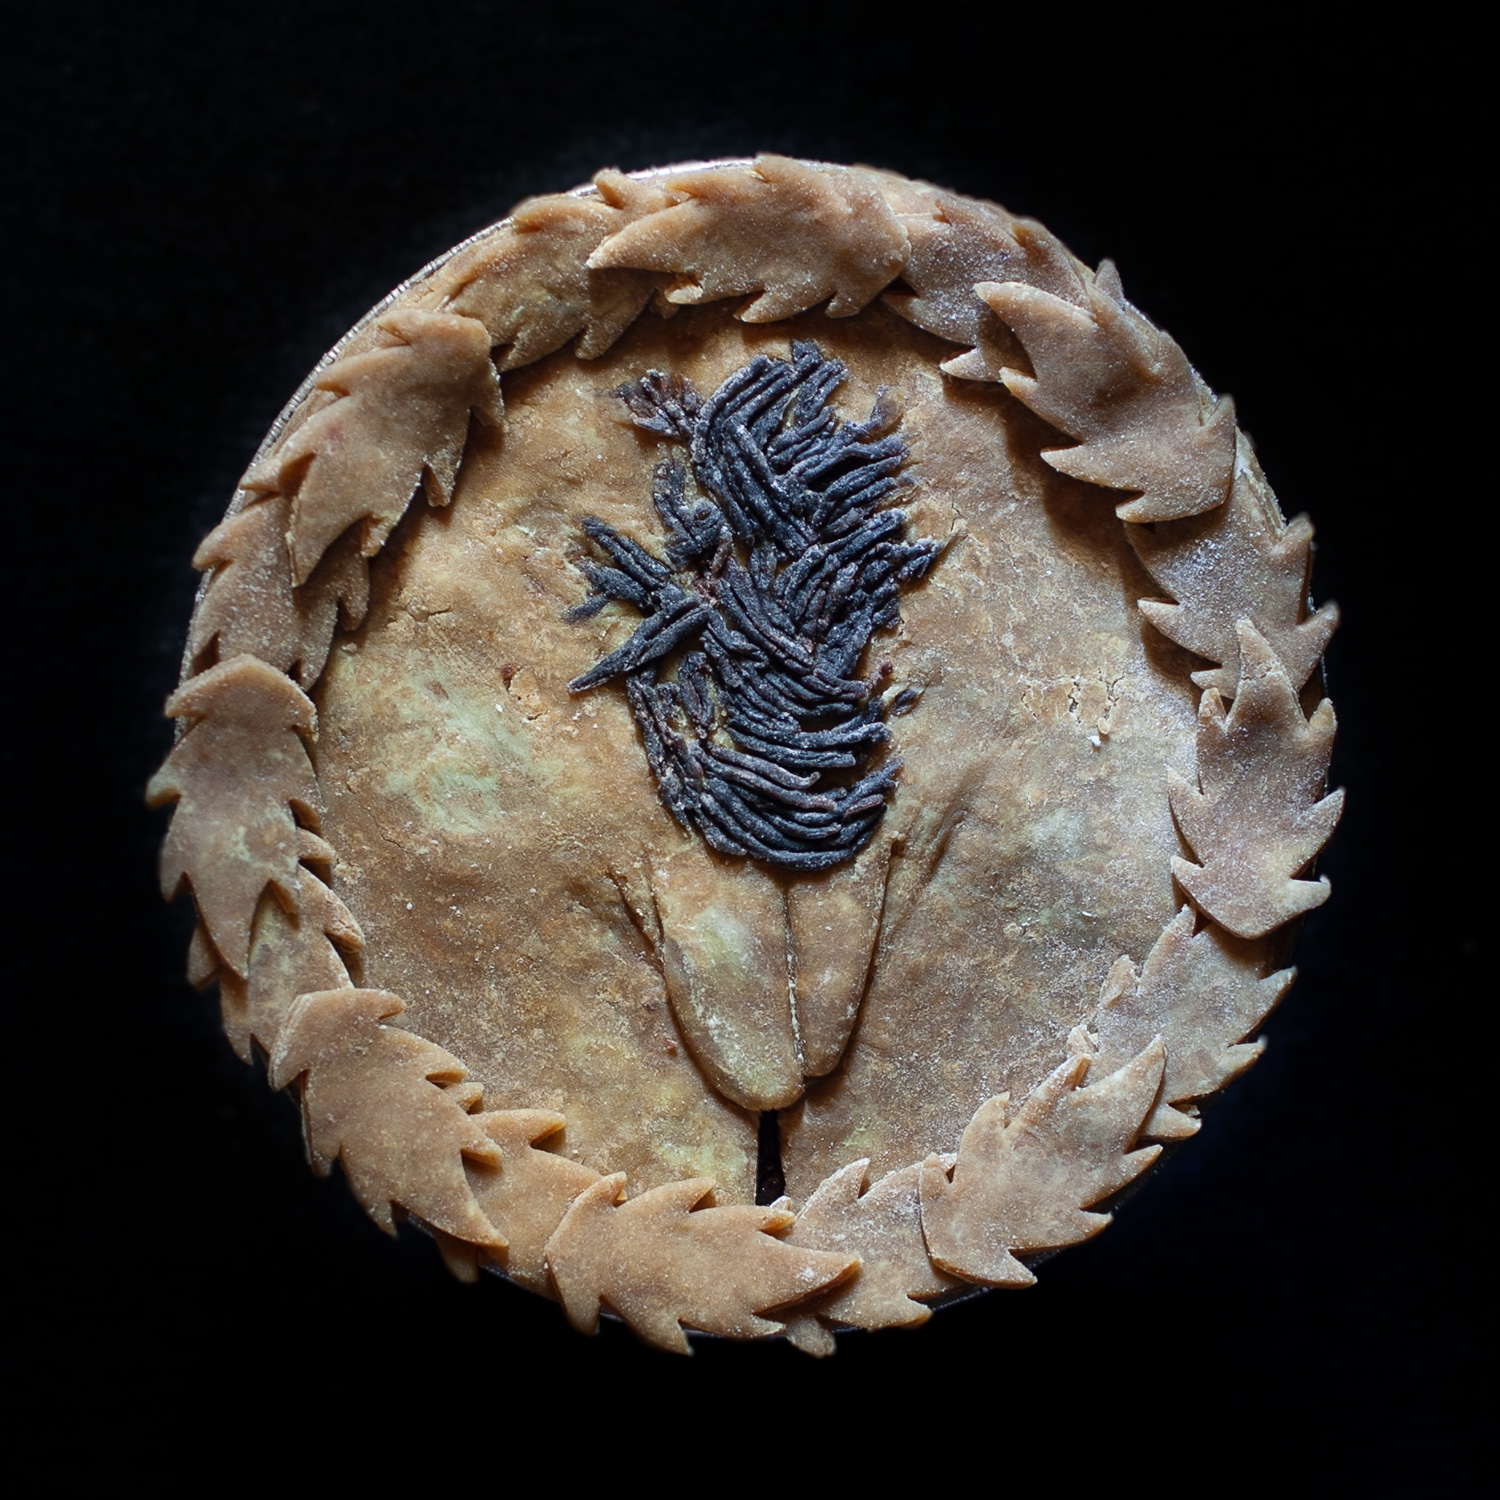 six inch unbaked pie with pie crust leaves around the edge and hand sculpted pie crust art that looks like a vulva with brown pubic hair